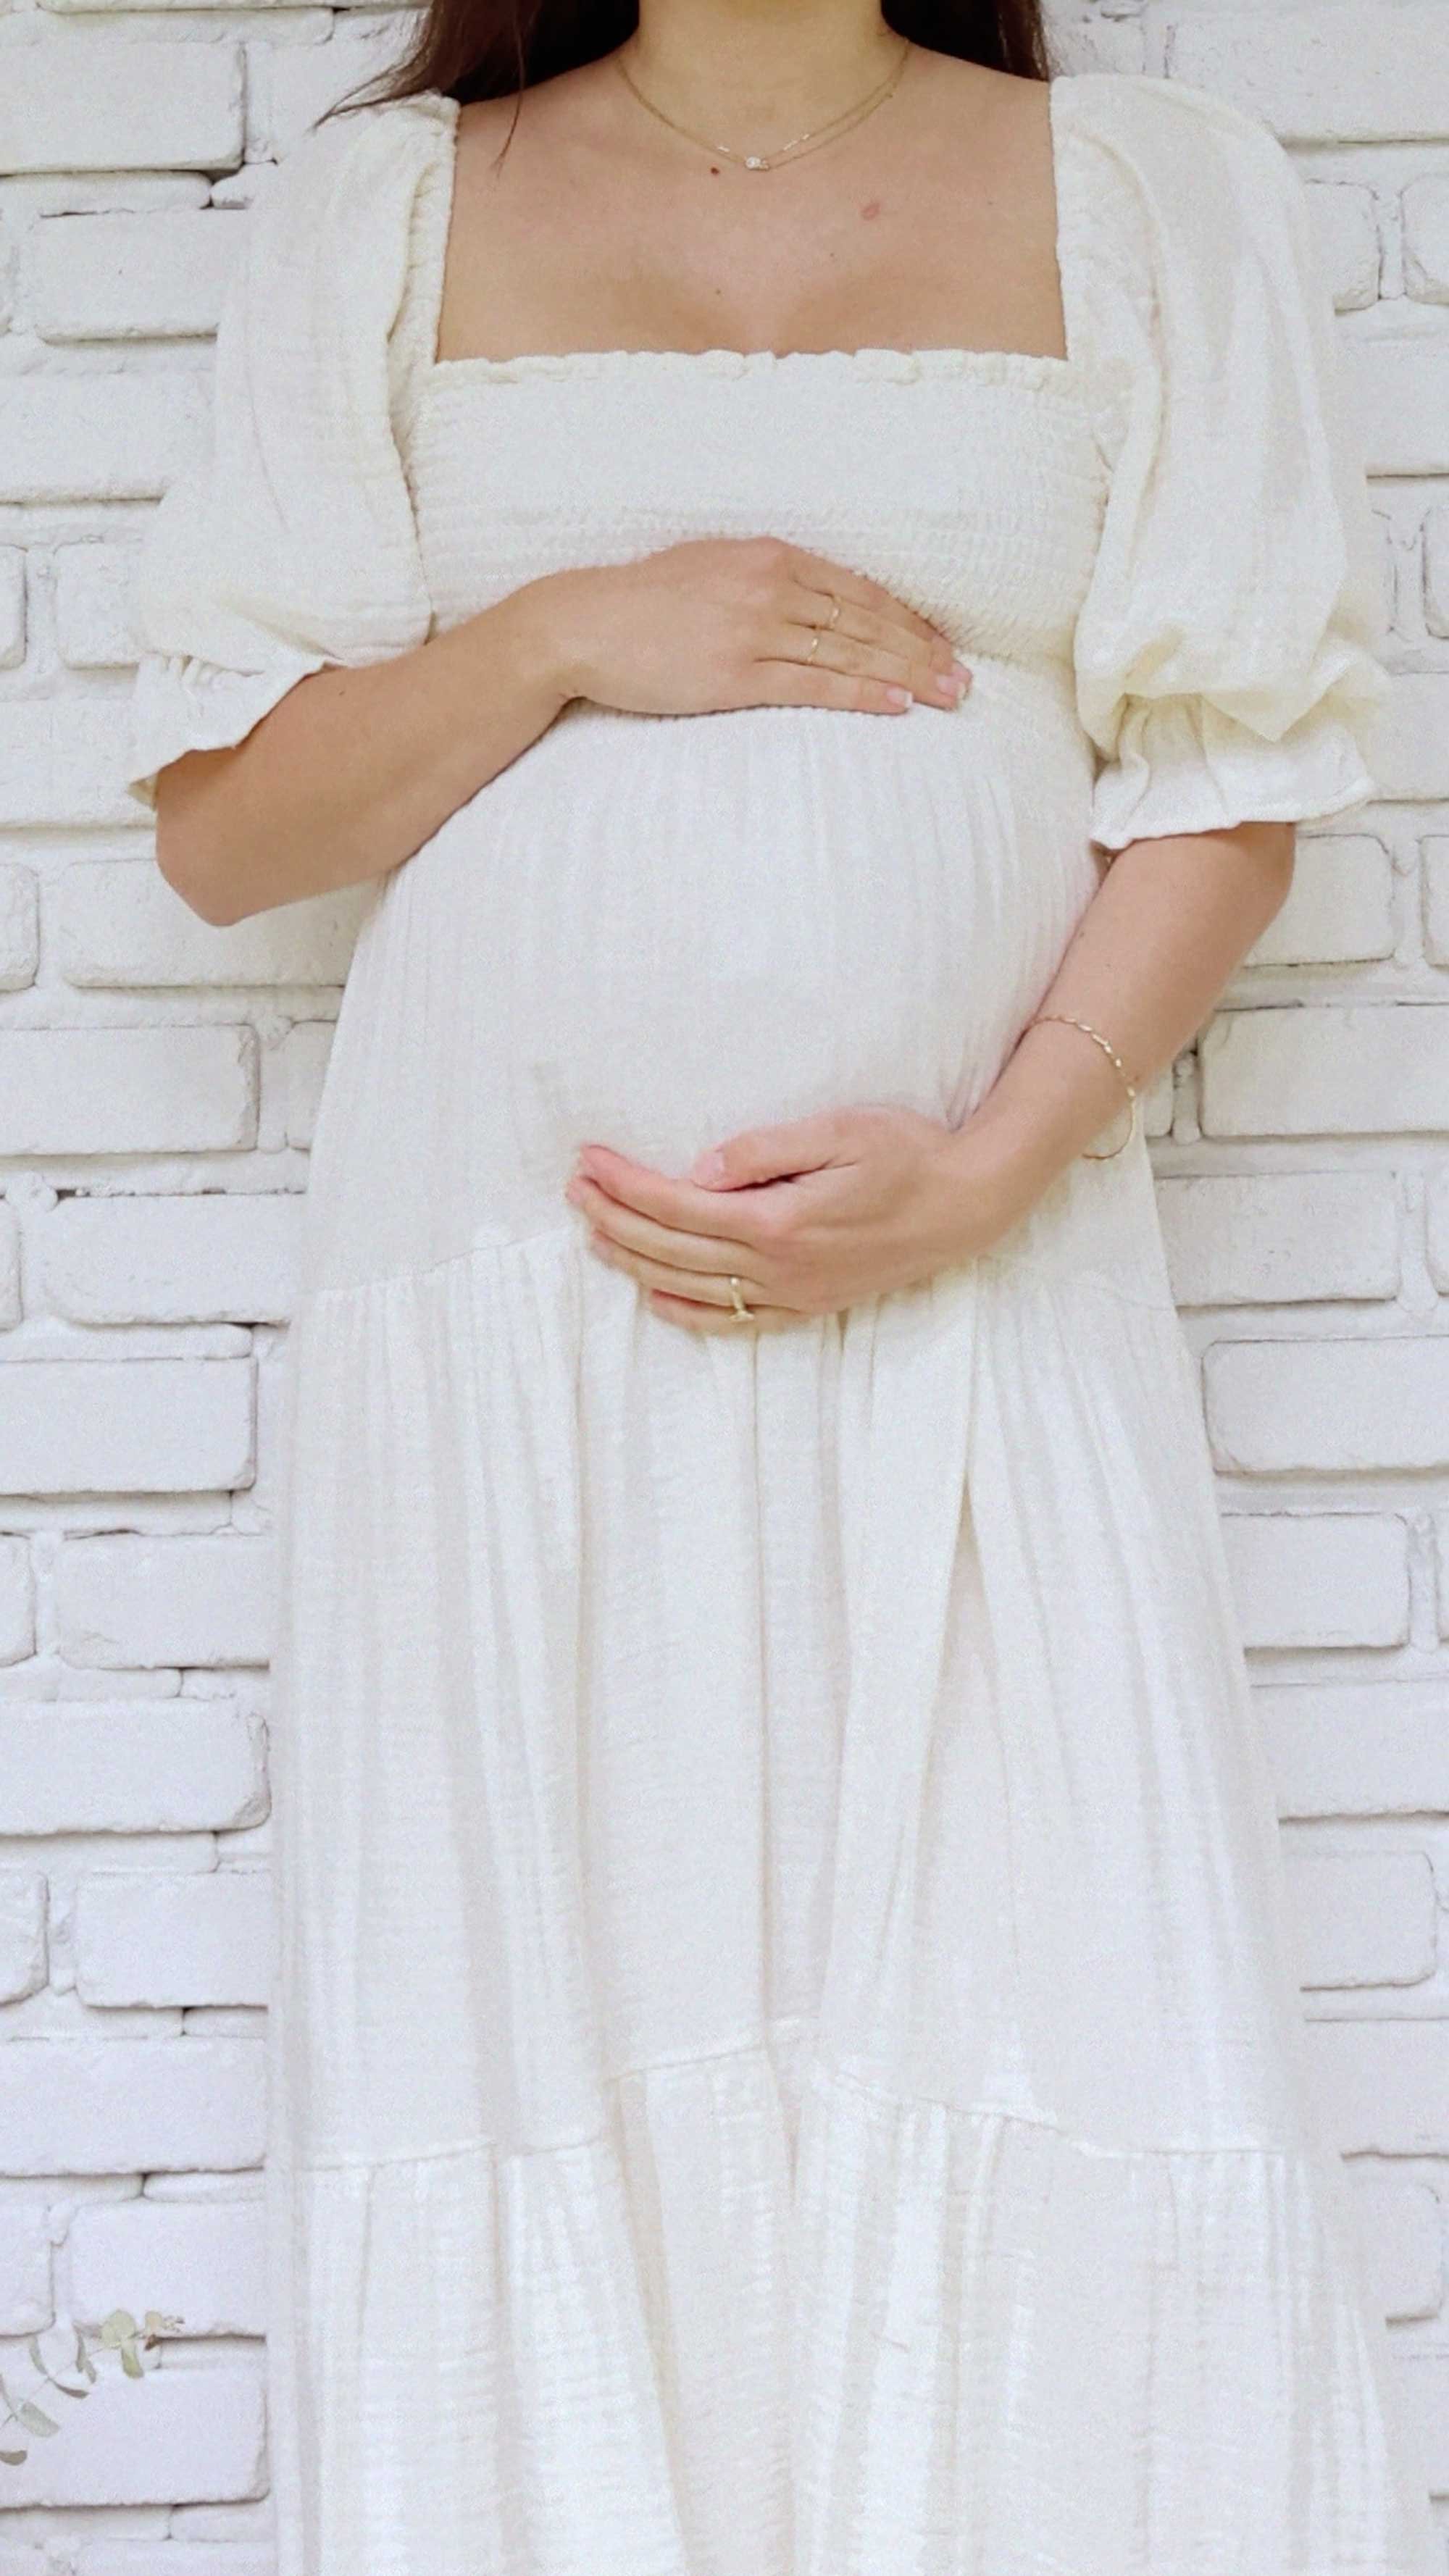 Cute cottage style summer maternity dress. @sarahchristine wearing Nothing Fits But Kiko Dress Soft muslin dress with puffed sleeves, smocked chest and sleeves in Seattle, Washington -4.jpg